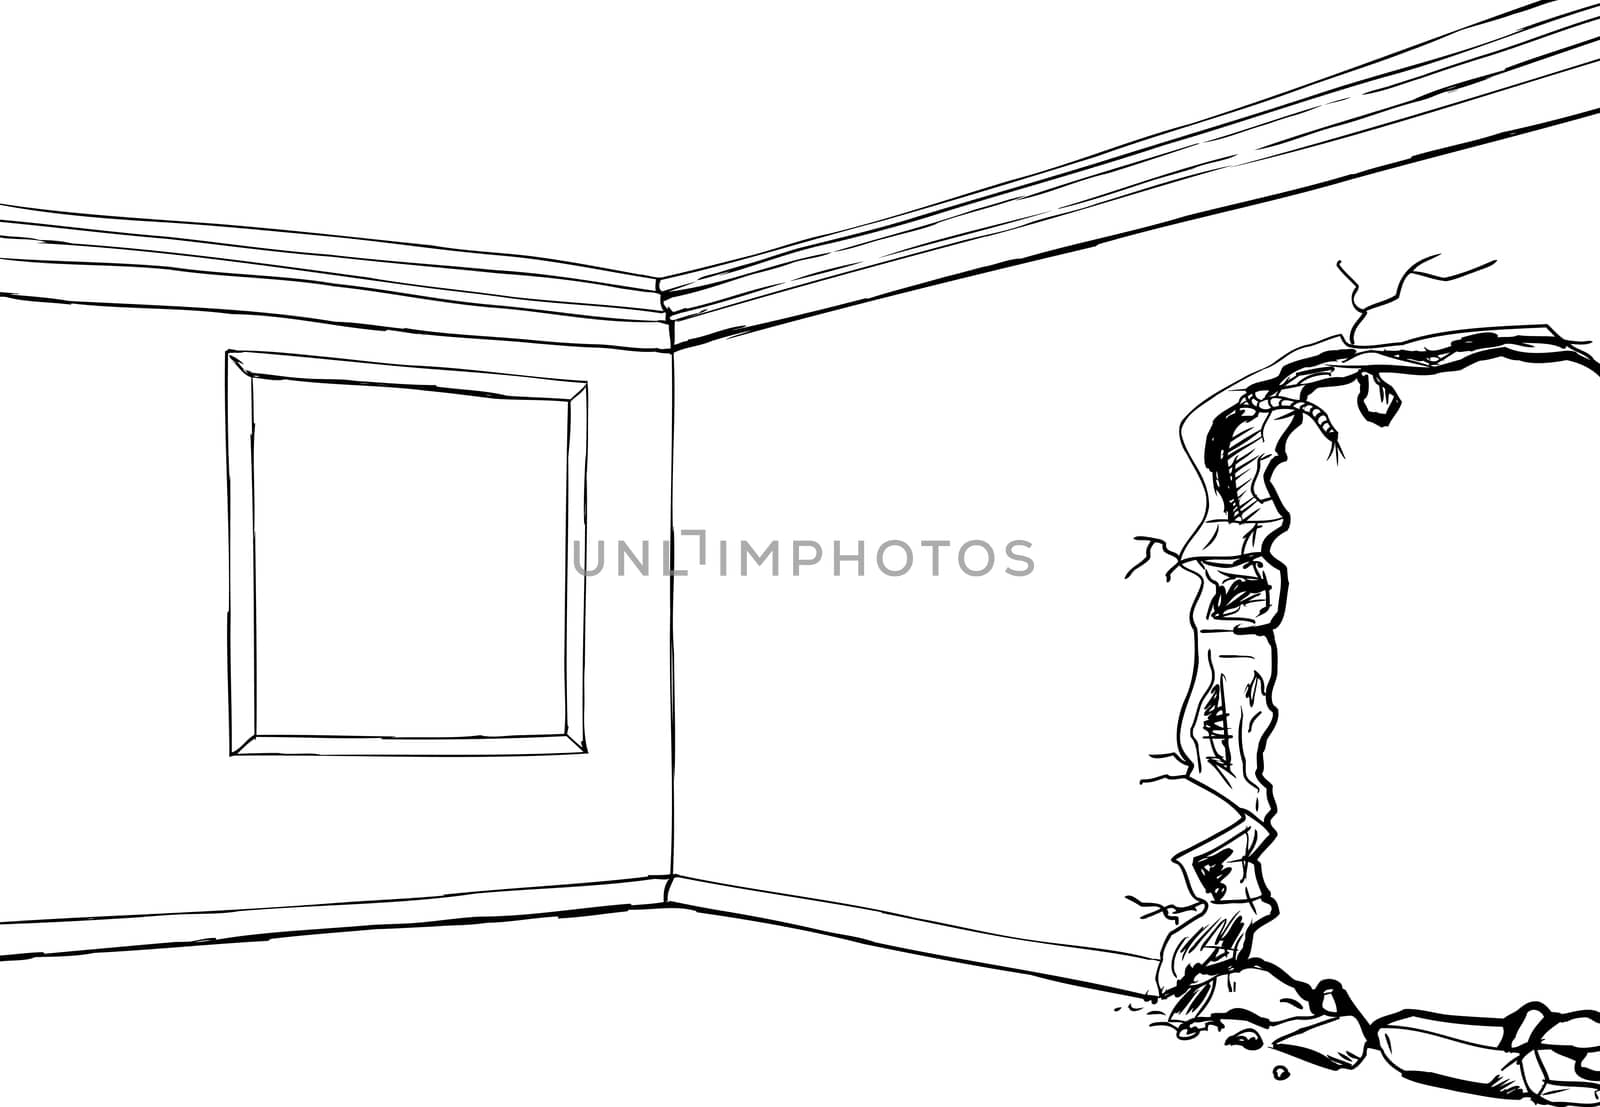 Outline drawing of room with empty picture frame and partially destroyed wall